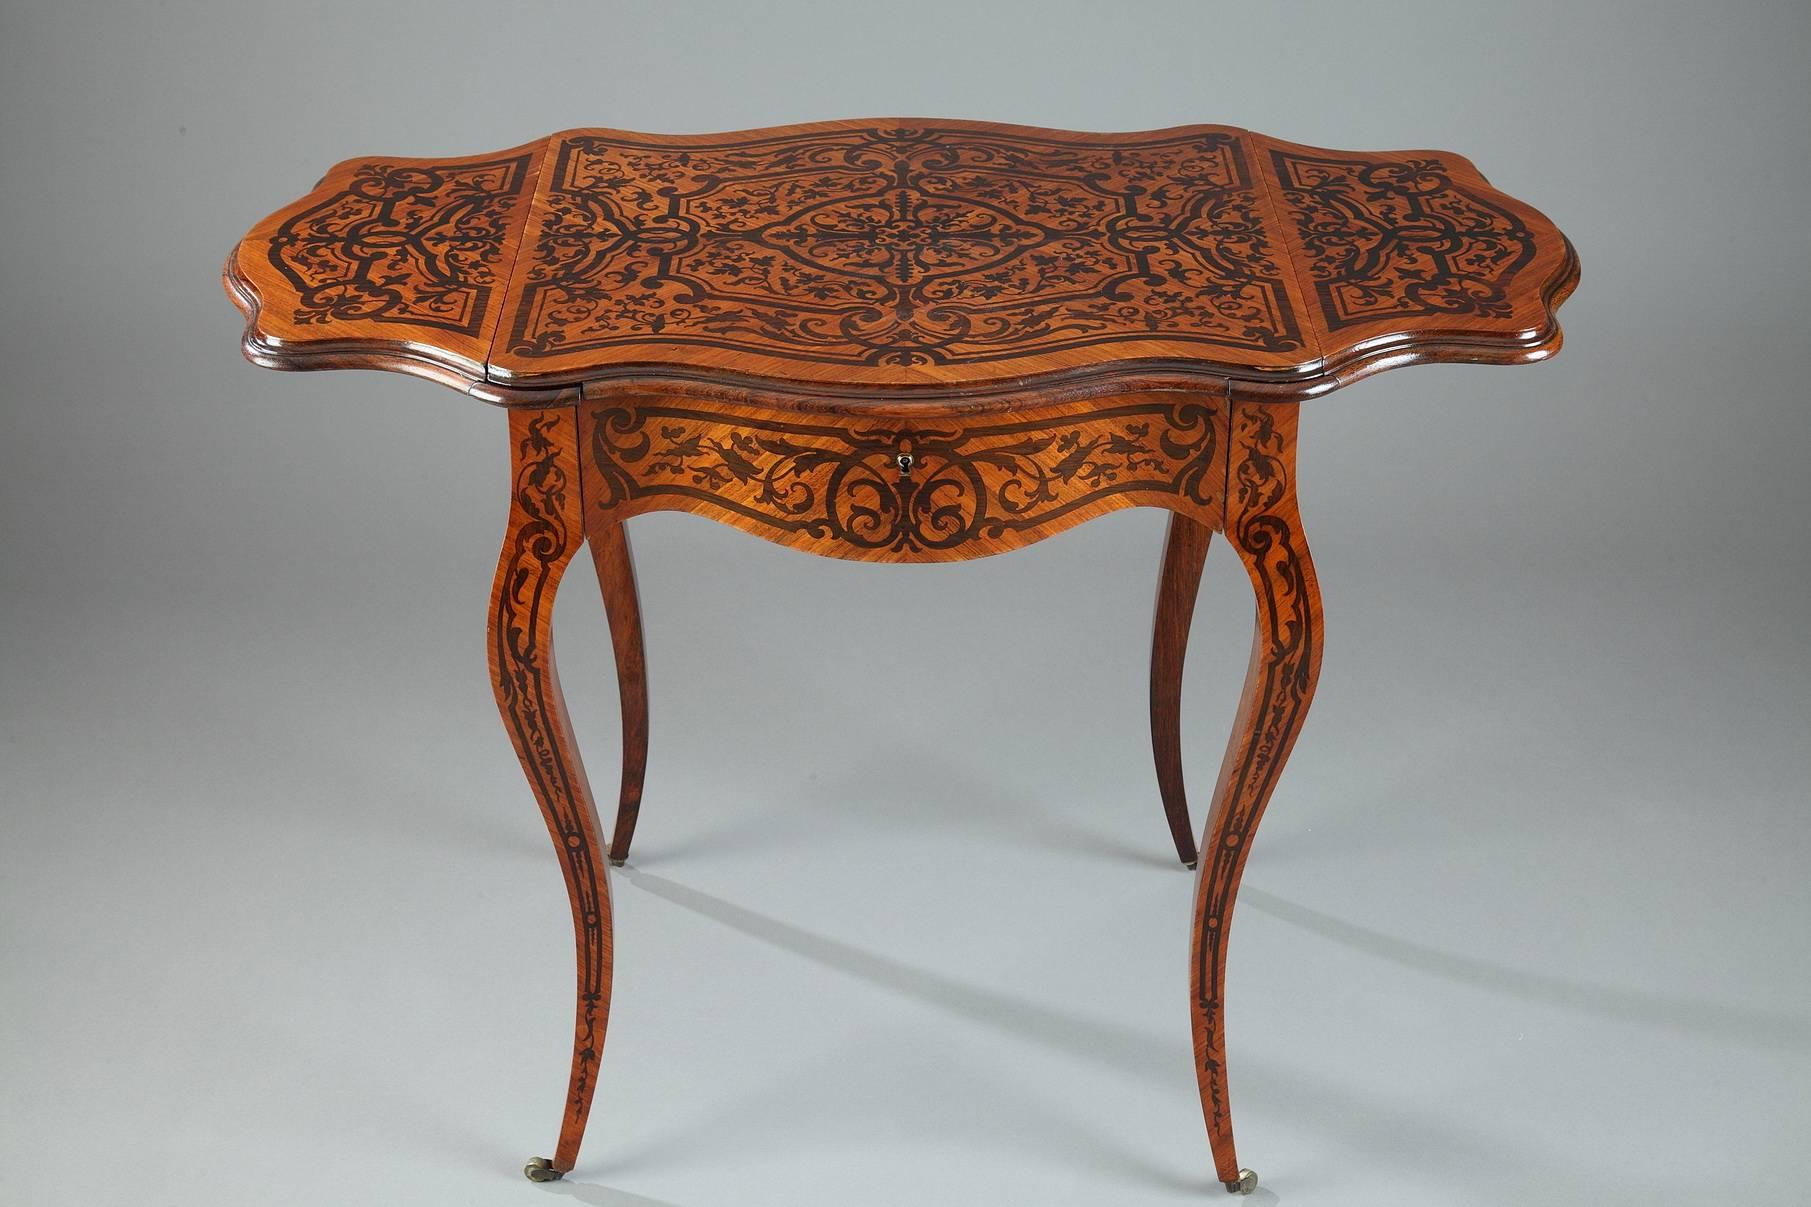 Napoleon III sewing table in rosewood marquetry with flowery branches, rinceau and scrolls decoration. The tabletop has two shutters that open on both sides of the central platter, over a veneer maple storage compartment. It rests on four curved